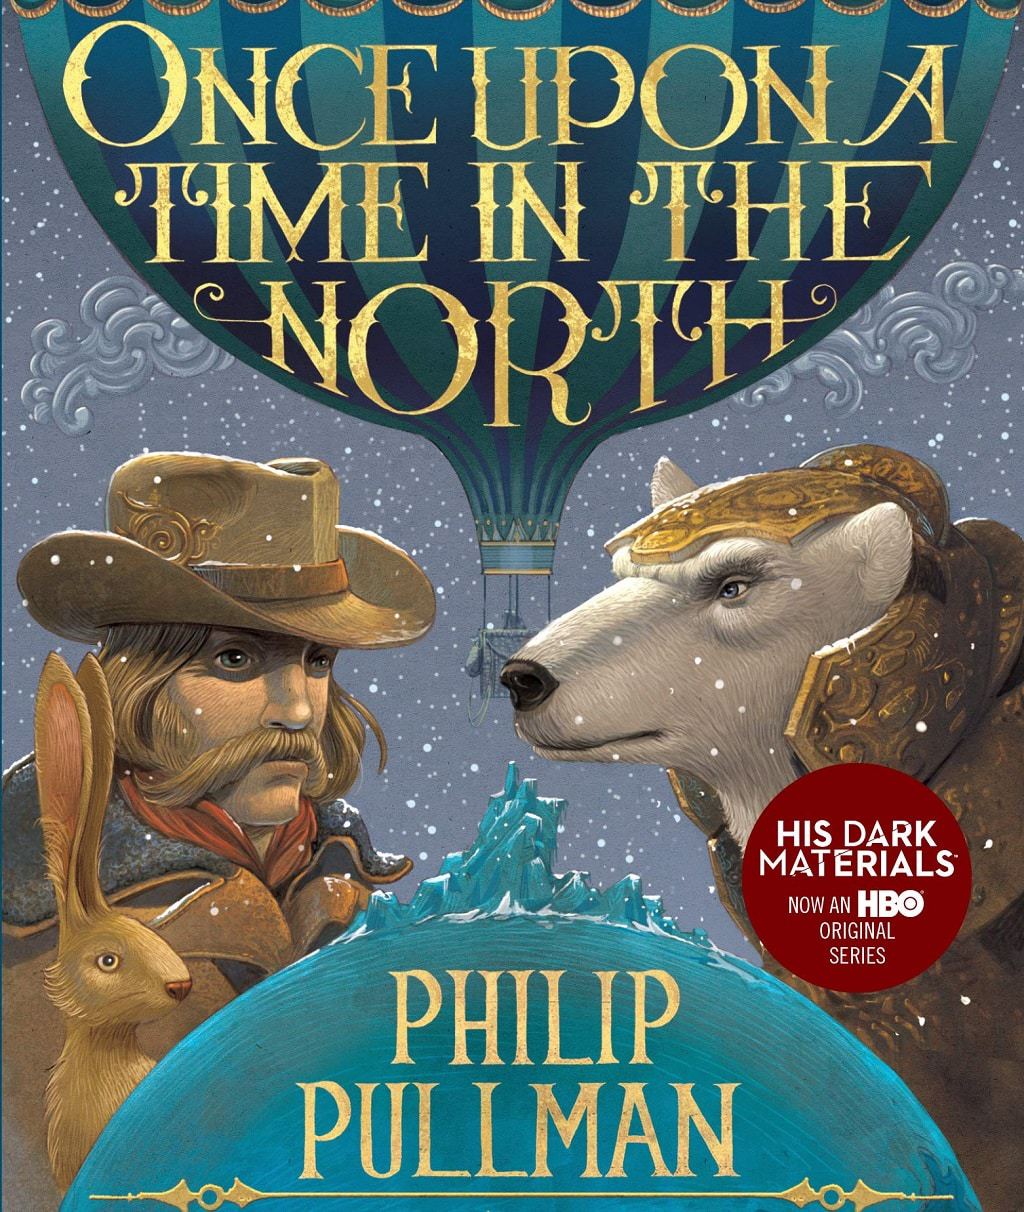 Once Upon a Time in the North Audiobook Free Download